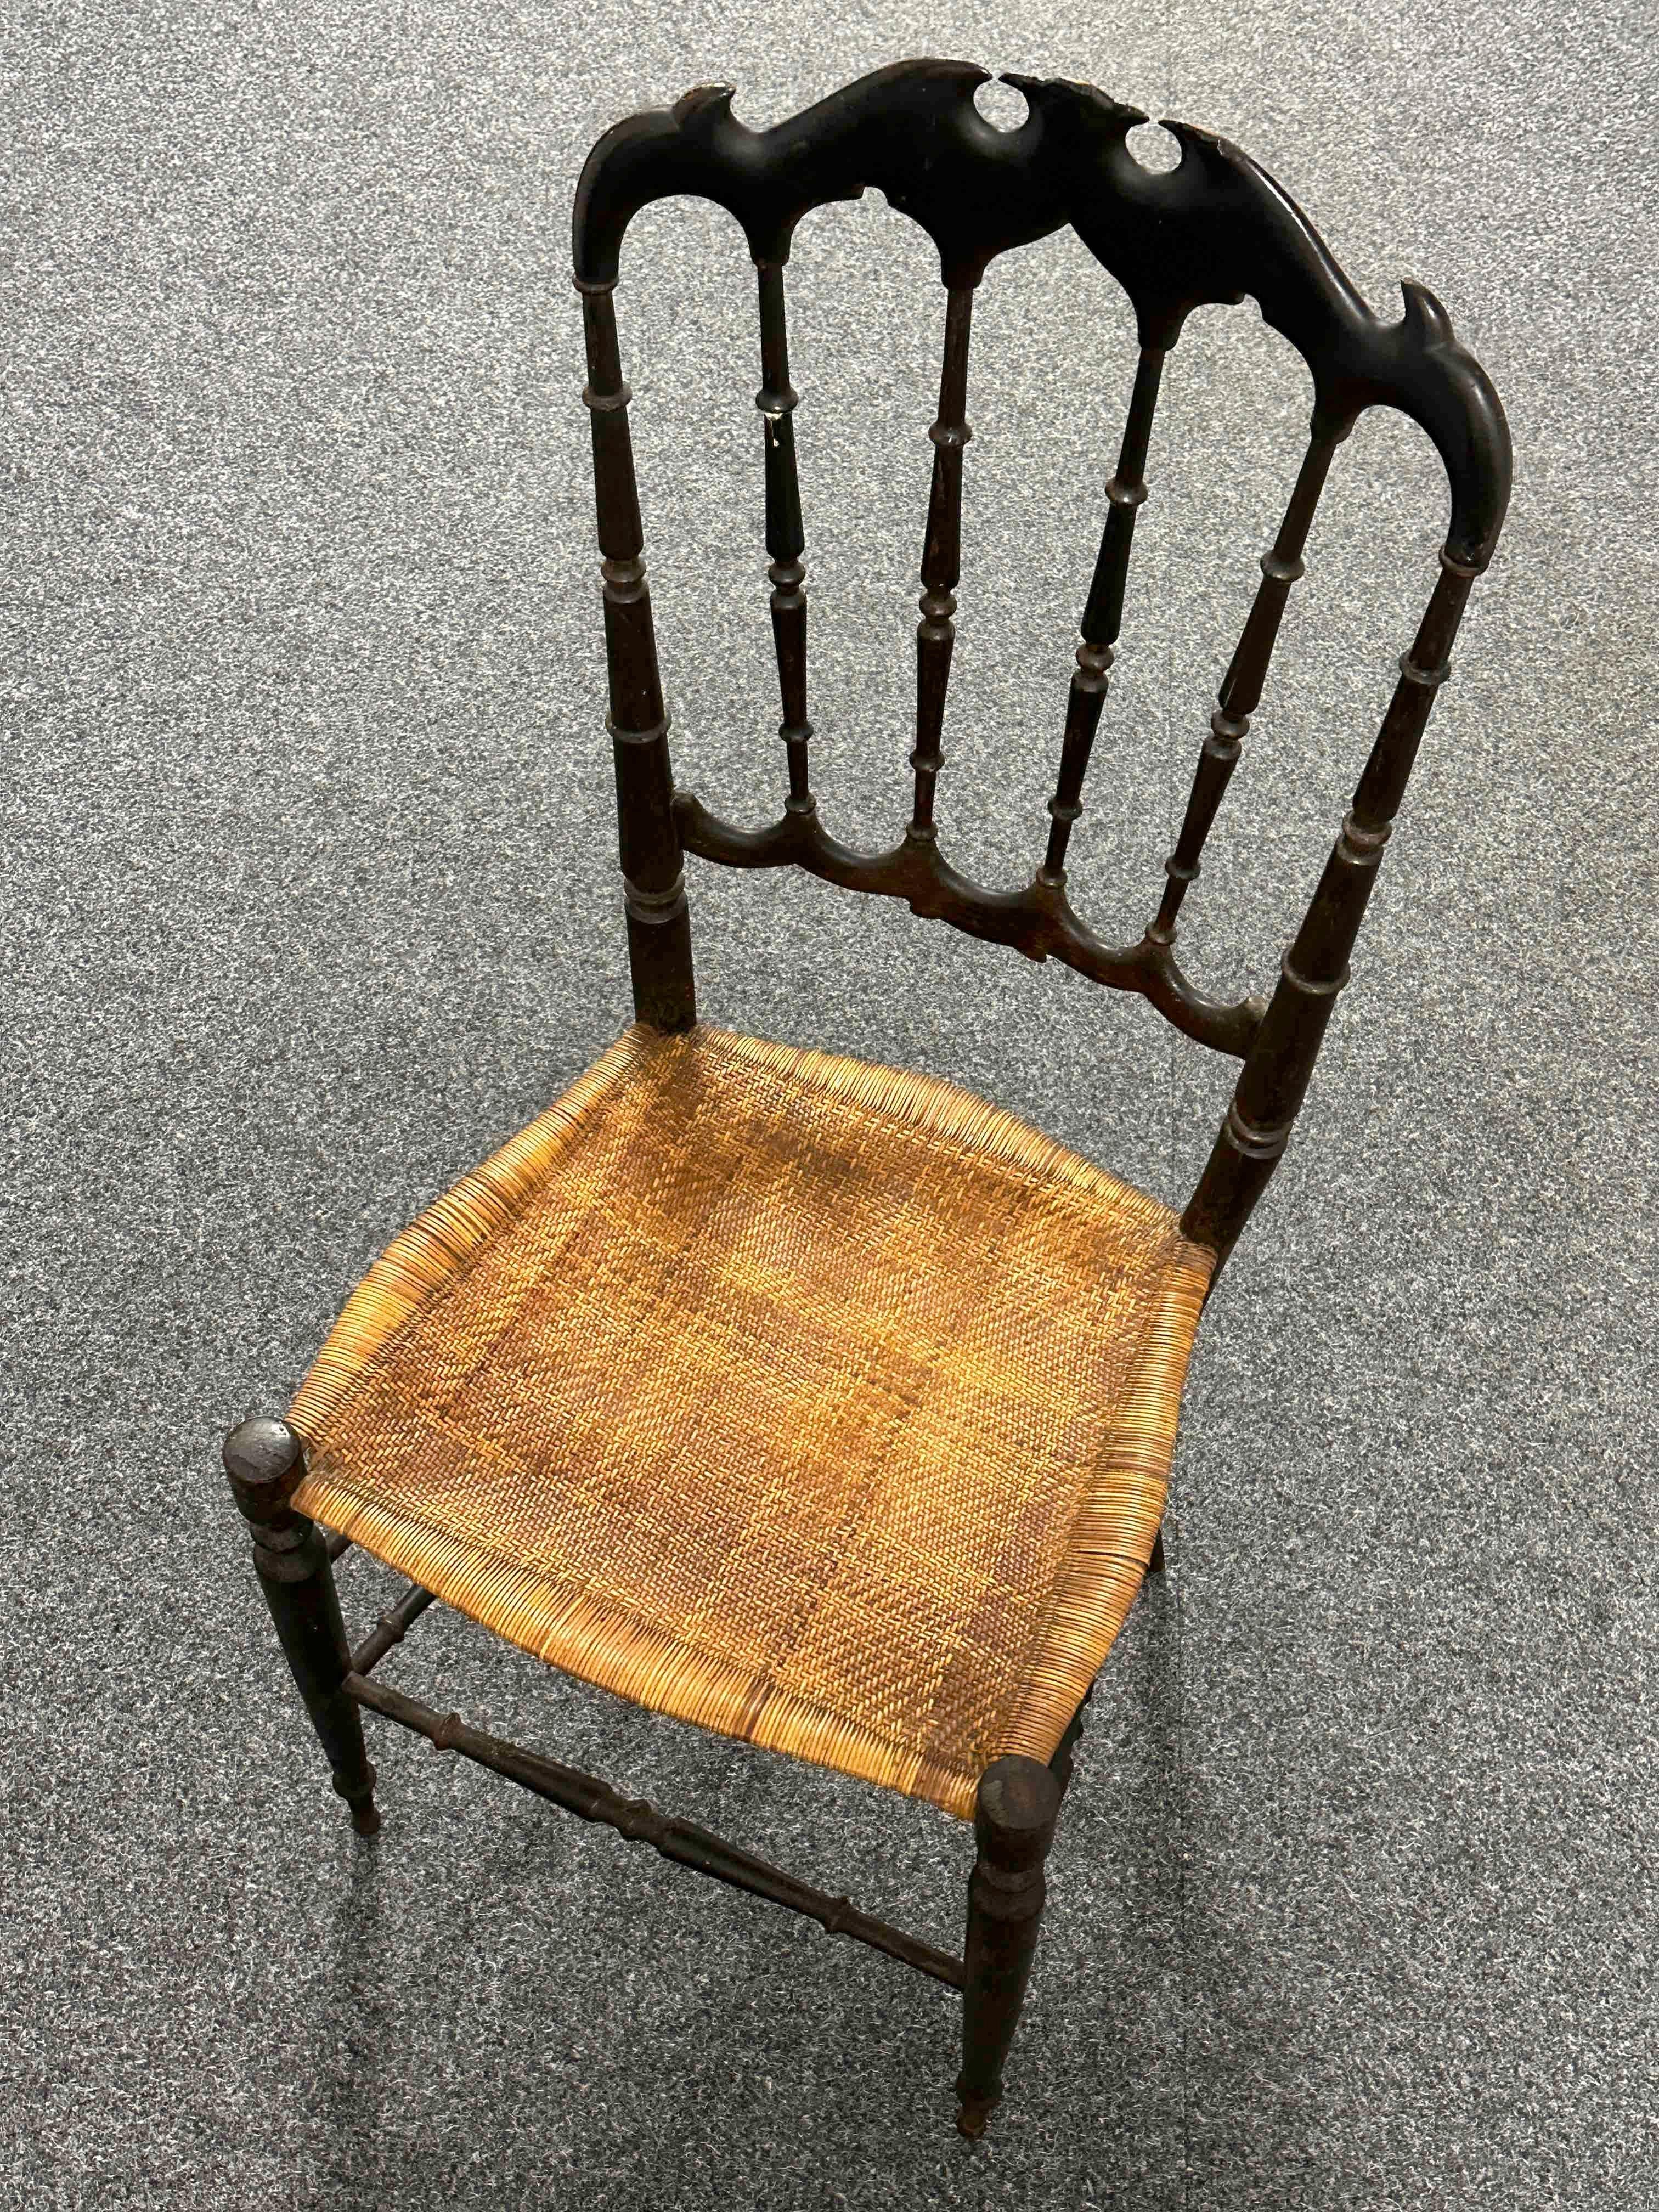 Beautiful Chiavari Wooden Chair Wicker Seat, Made in Liguria, Italy, 1930s For Sale 9